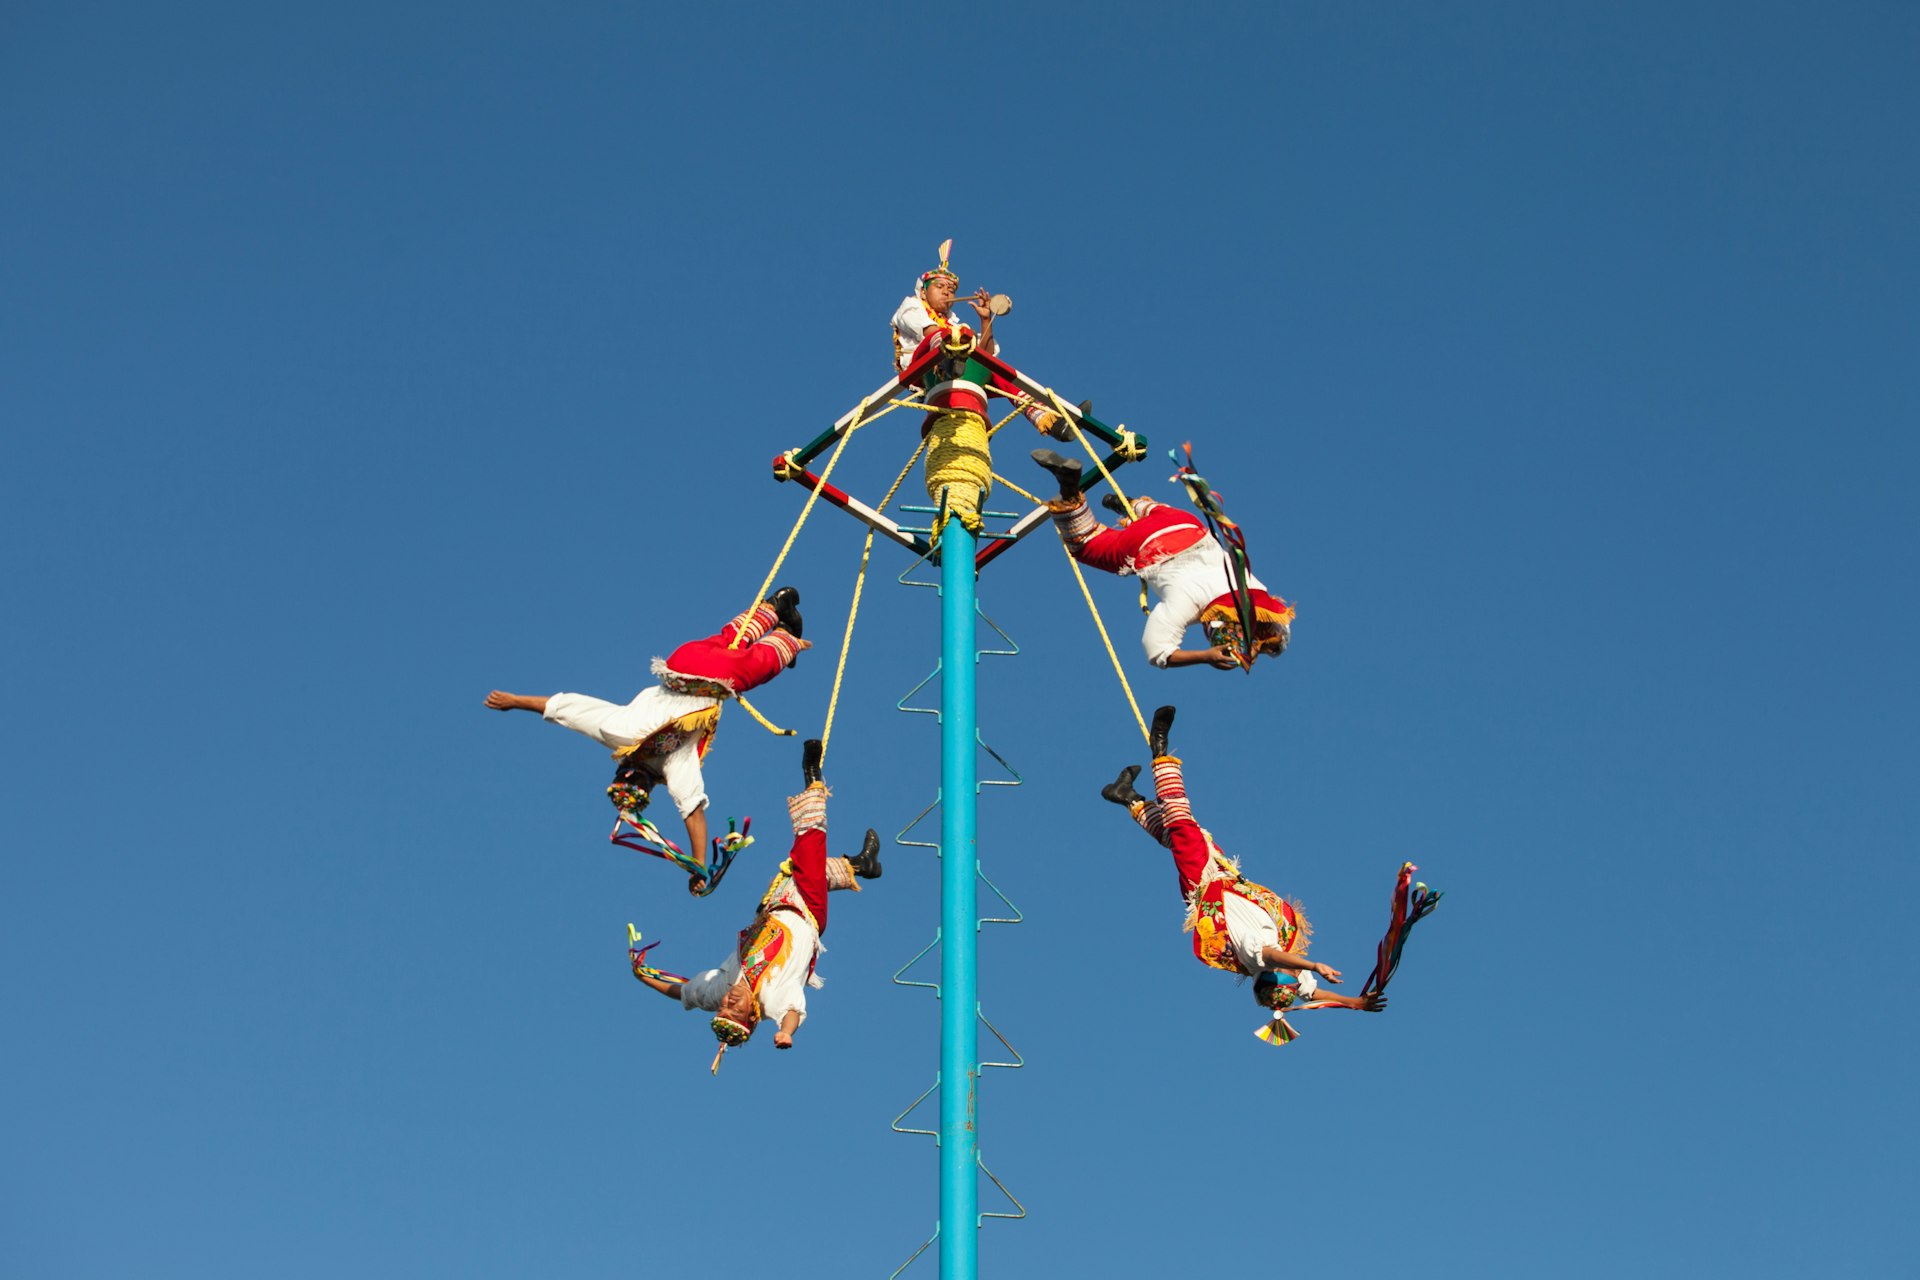 Five flying acrobats (or “voladores”) enact their ritual, flying off a pole in traditional costumes suspended by their feet